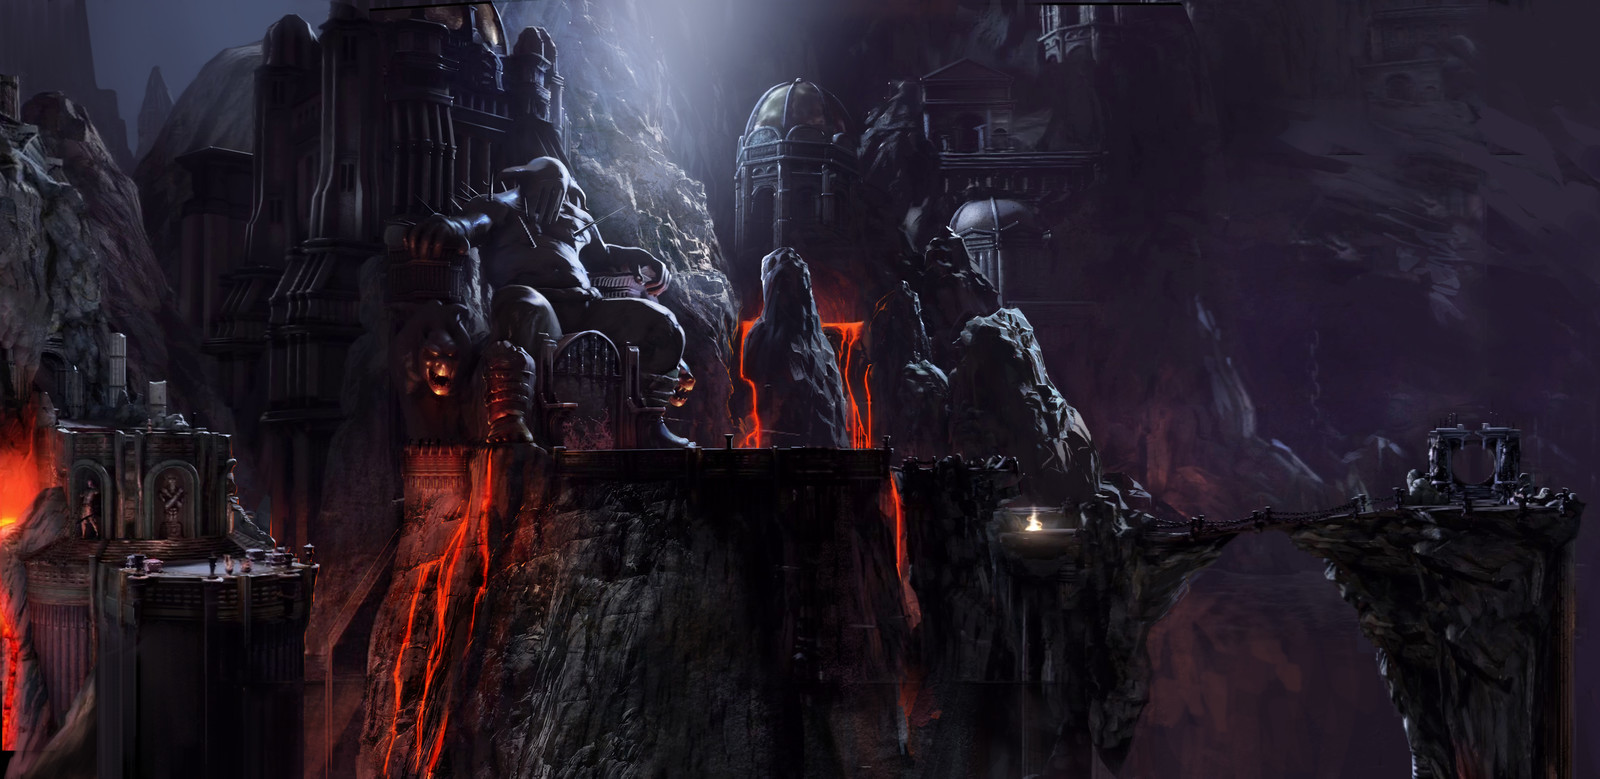 Matte painting used for the background of the Hades level